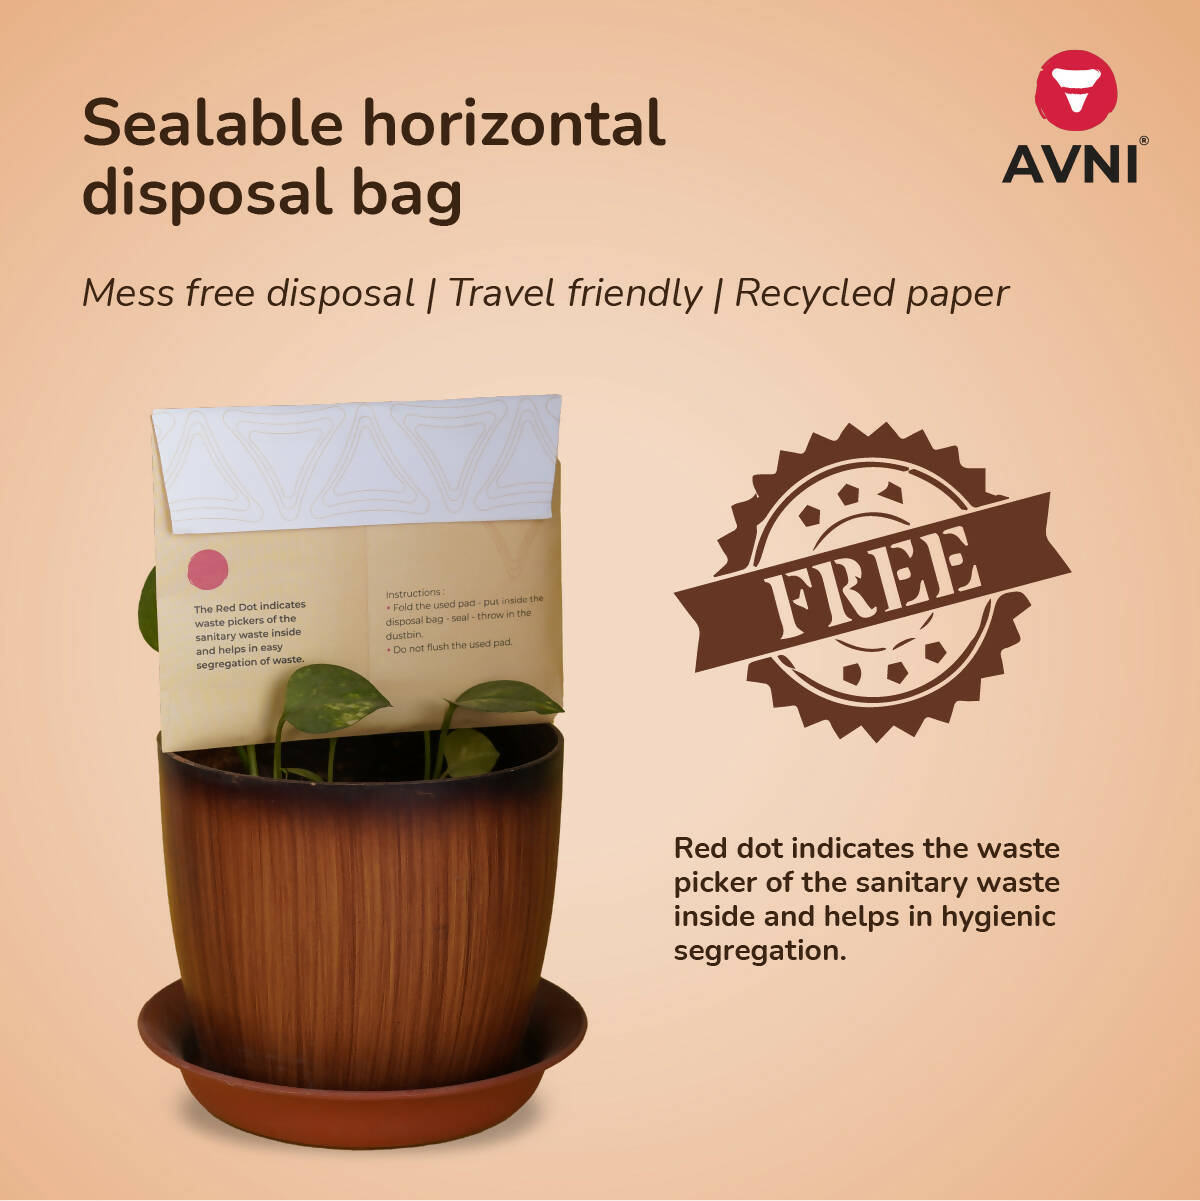 Avni Natural Cotton Sanitary Pads (L, Pack of 12) with Paper Disposal Bags | Medium flow Wemy Store